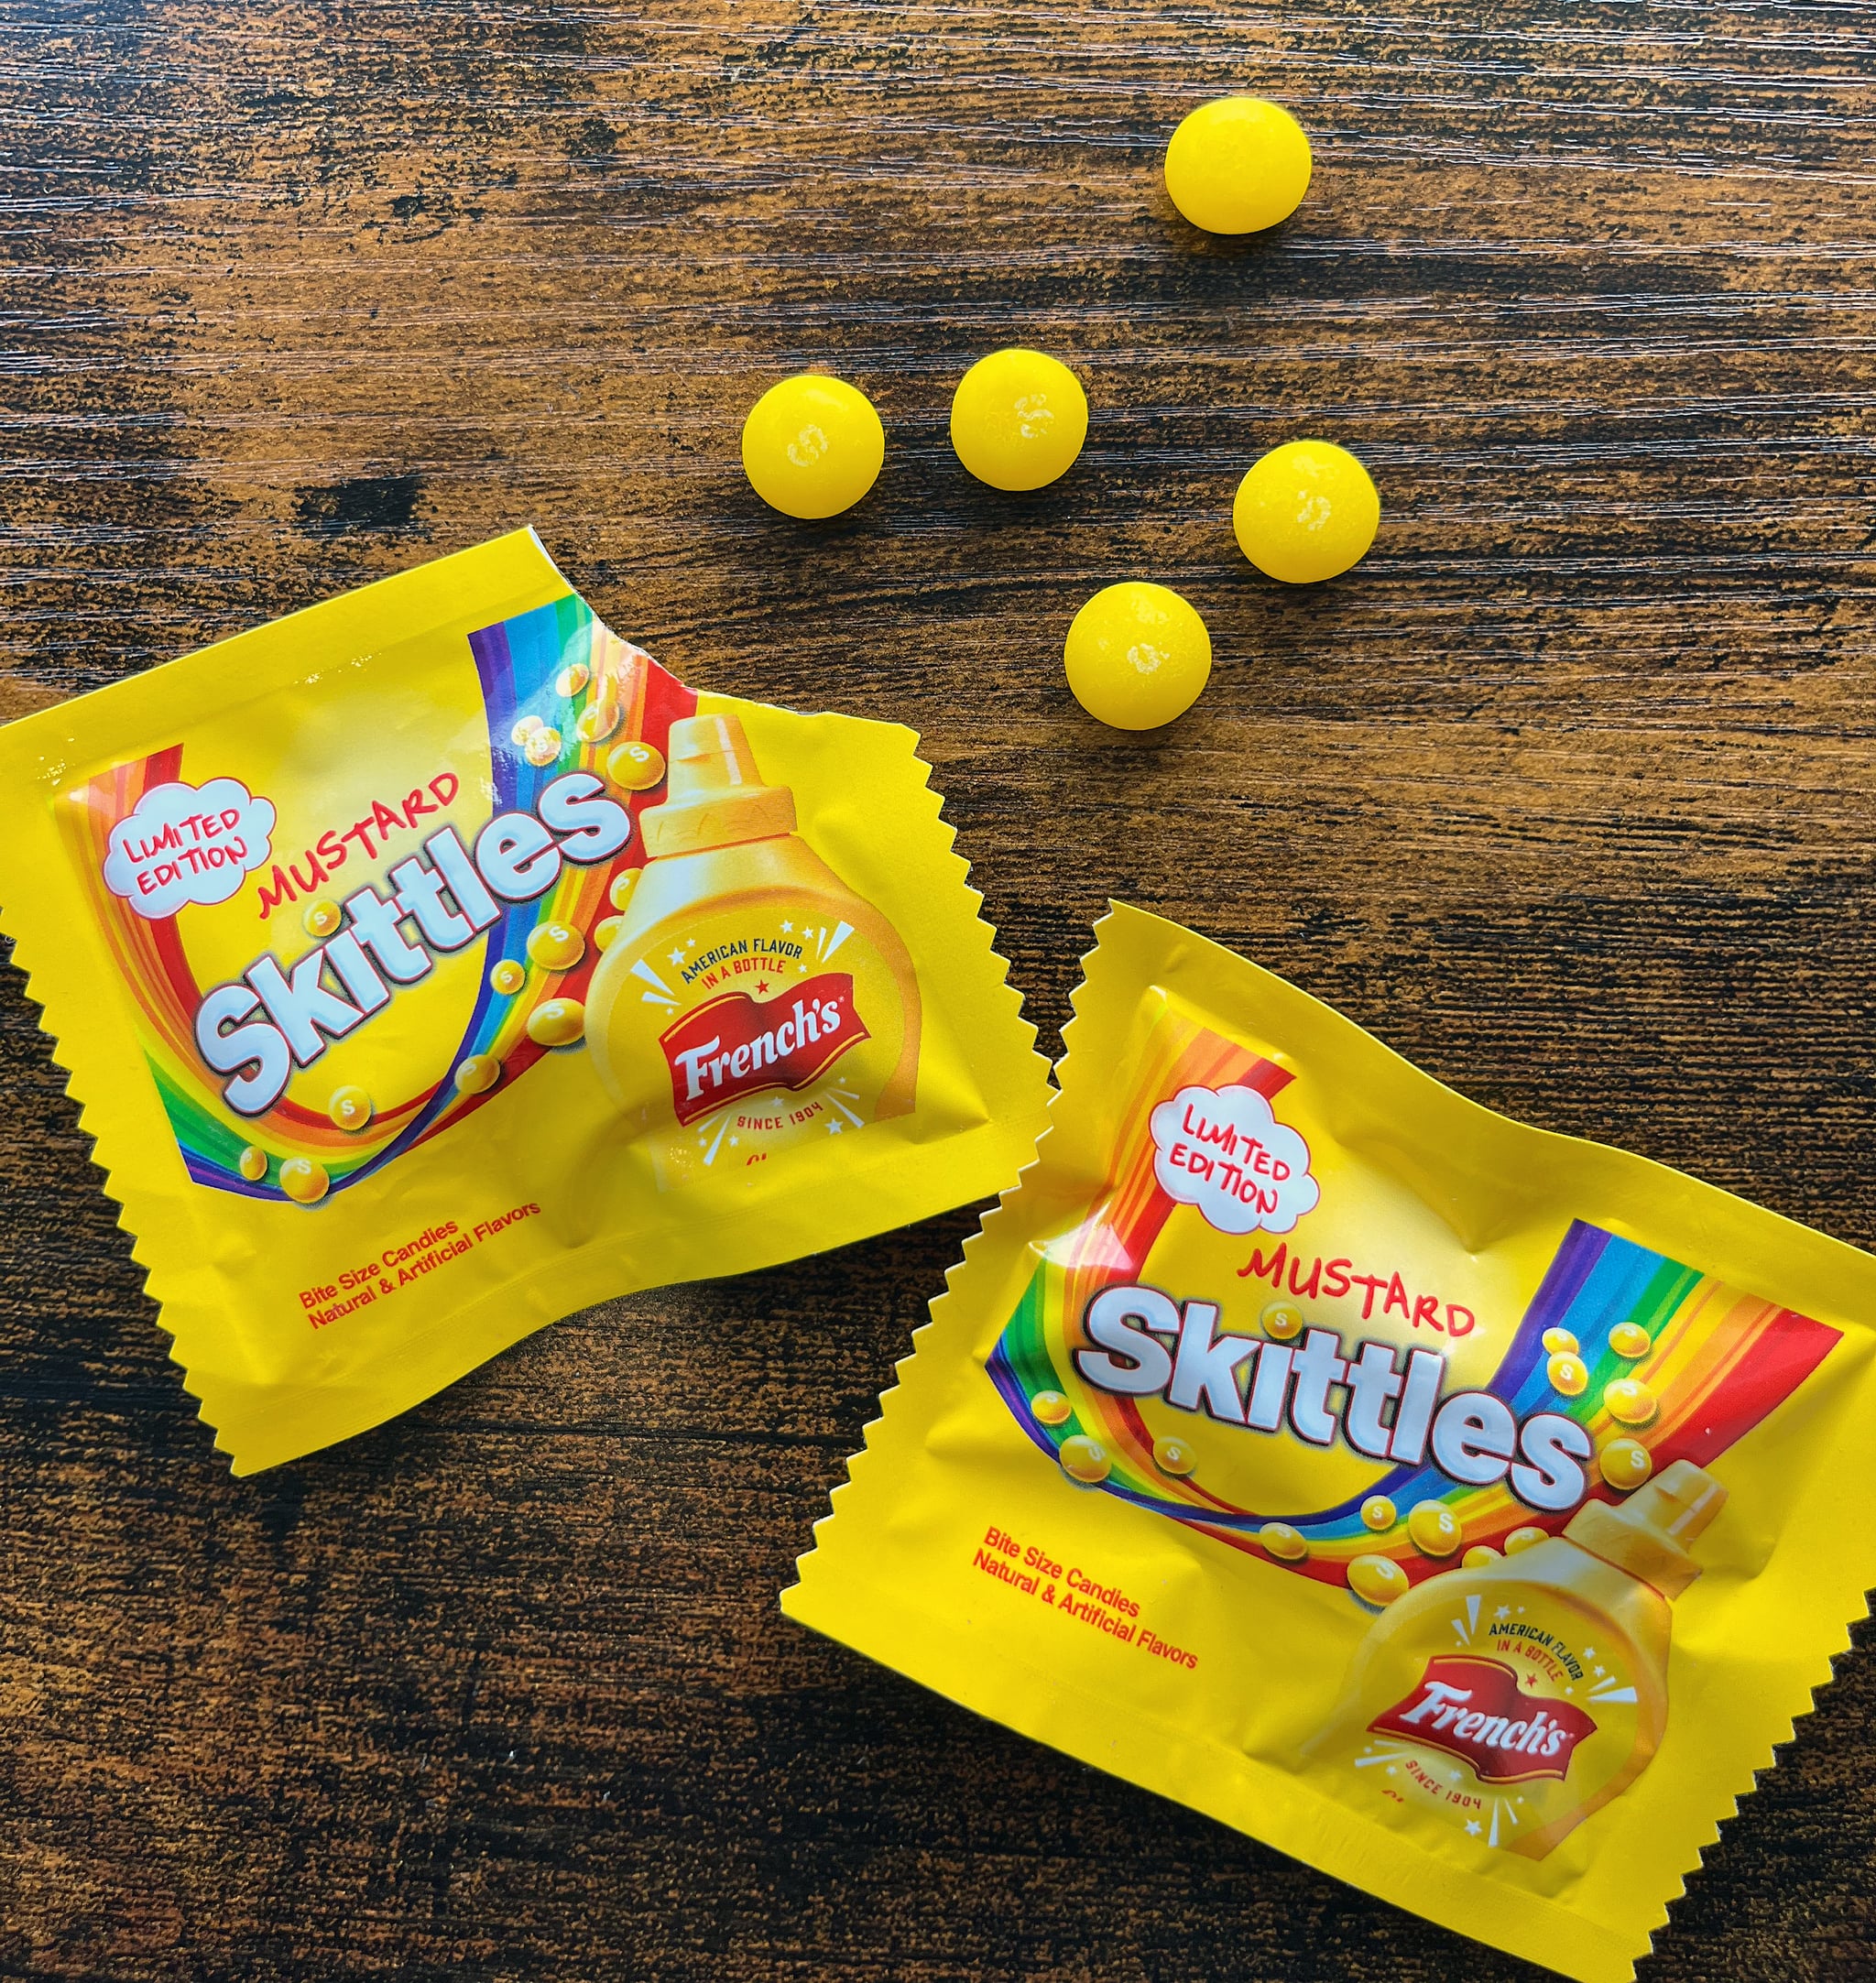 Two packages of French's mustard-flavoured Skittles candies.